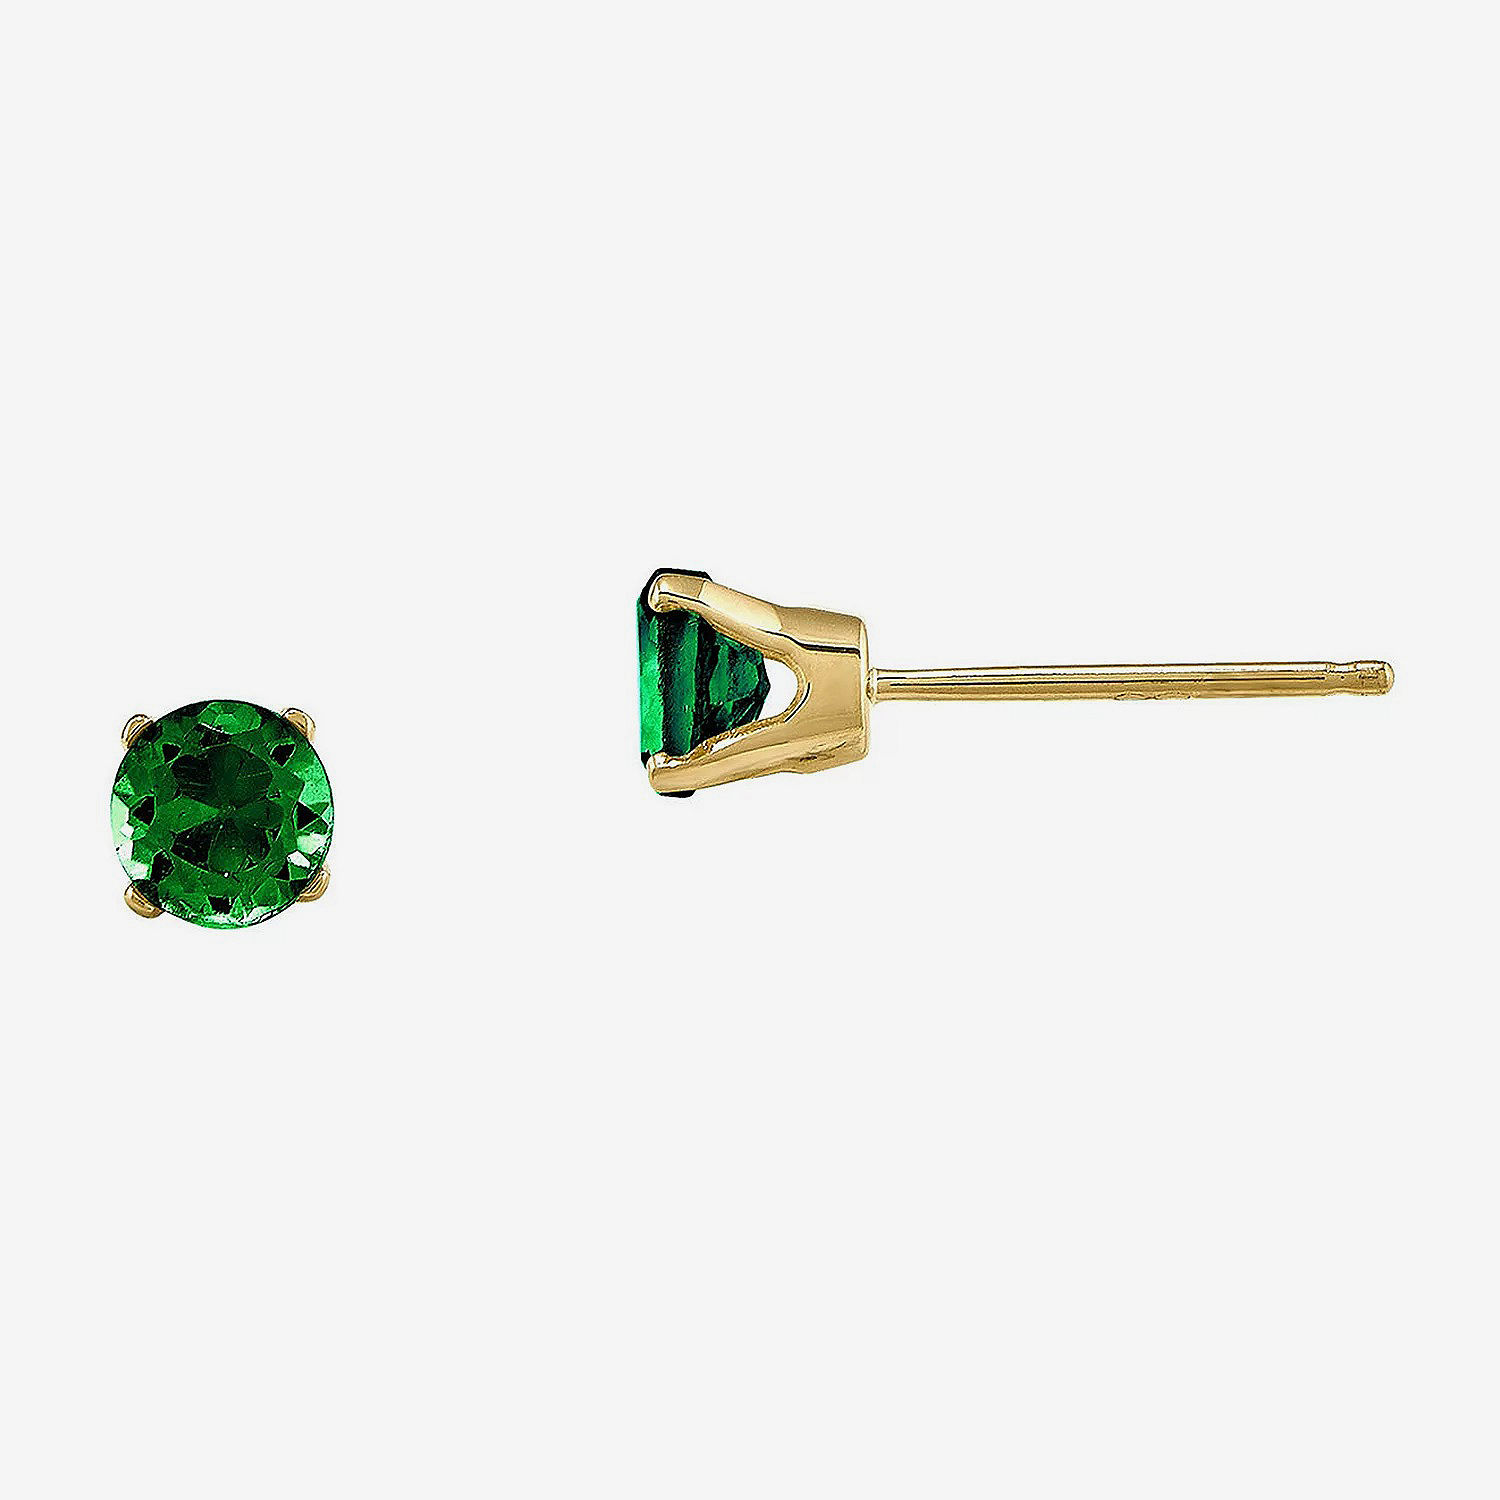 4mm Round Genuine Emerald 14K Yellow Gold Earrings, Color: Green - JCPenney